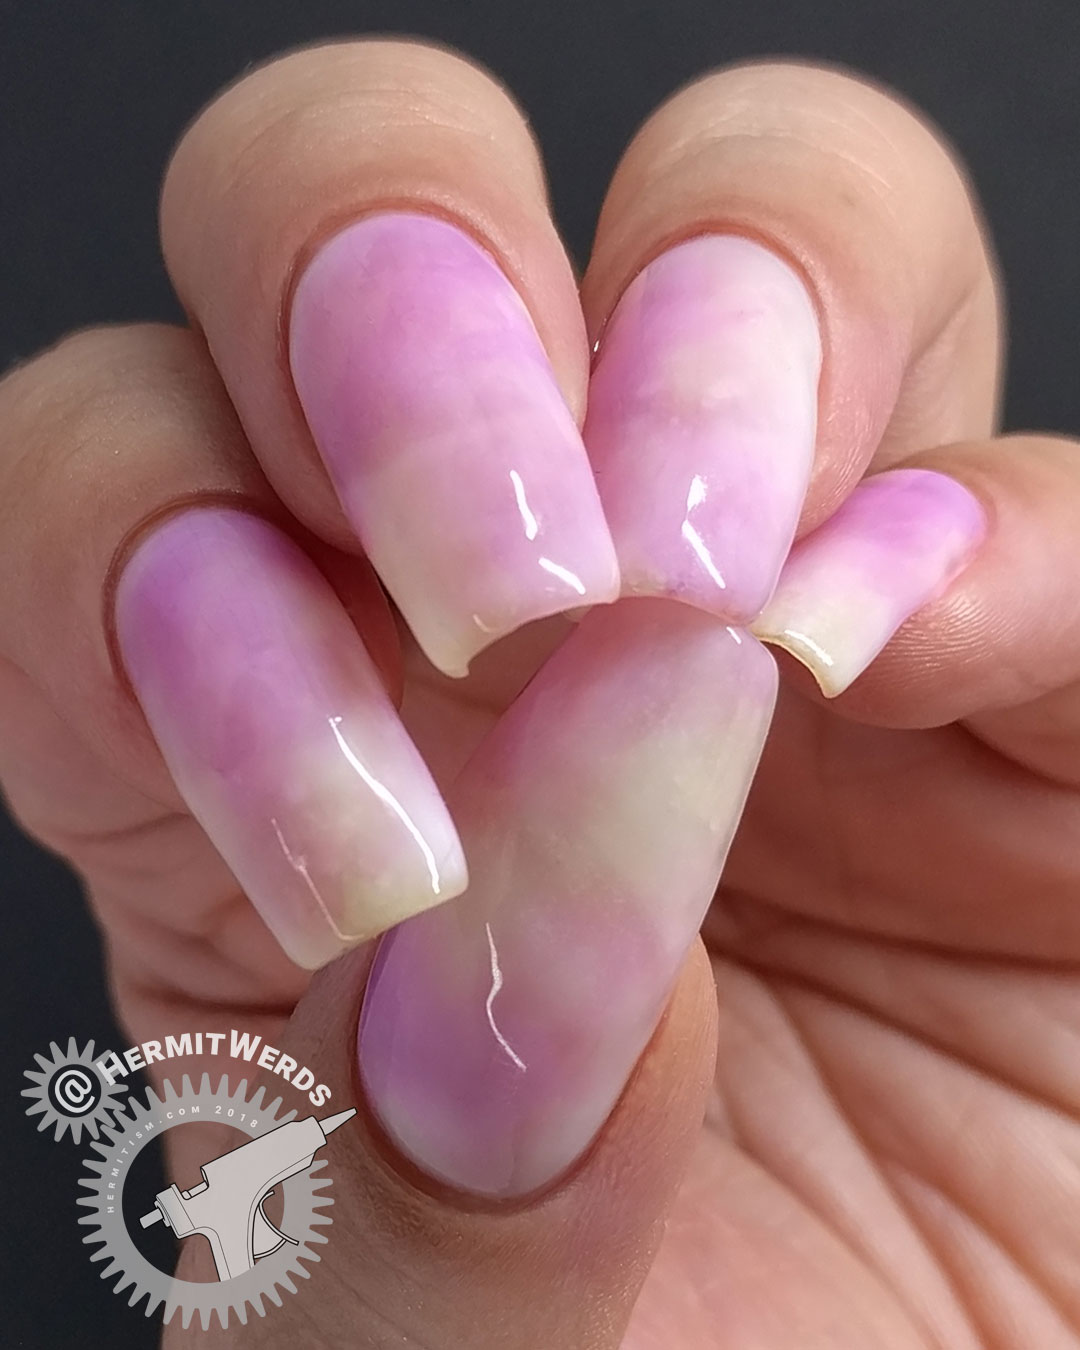 On Violet Waters - Hermit Werds - nails with soft translucent white and pink gradient